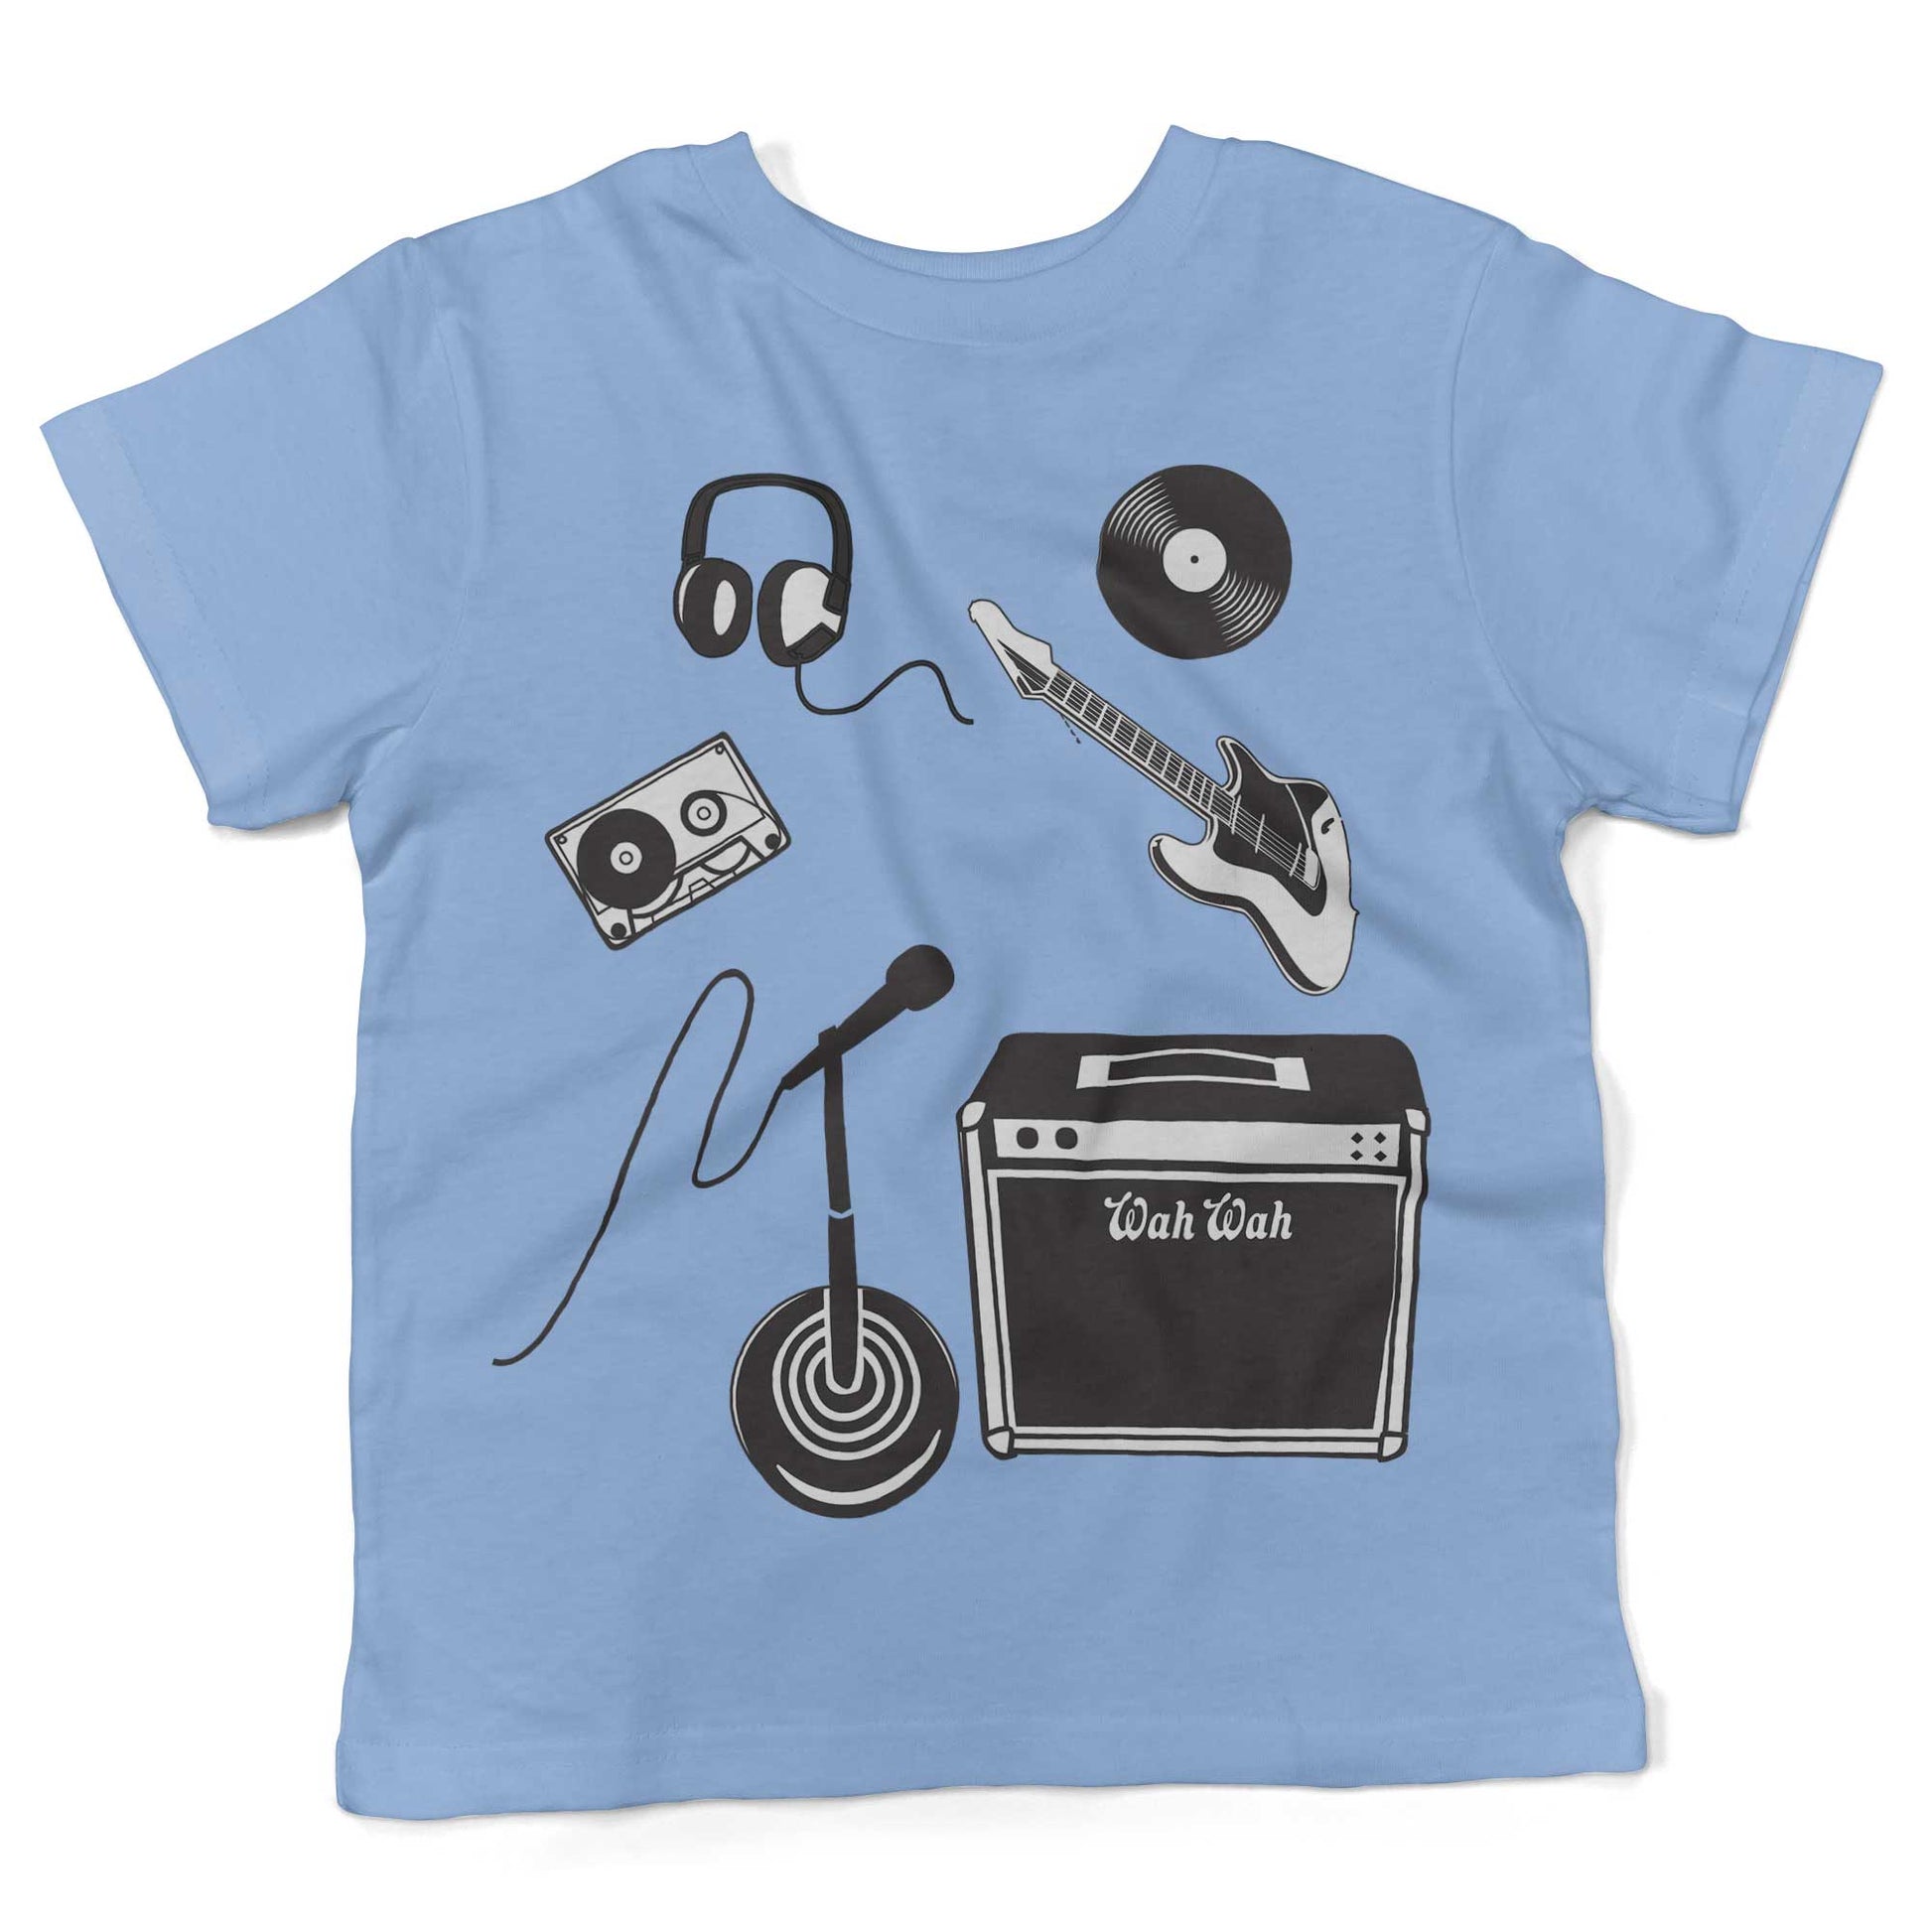 With The Band Toddler Shirt-Organic Baby Blue-2T